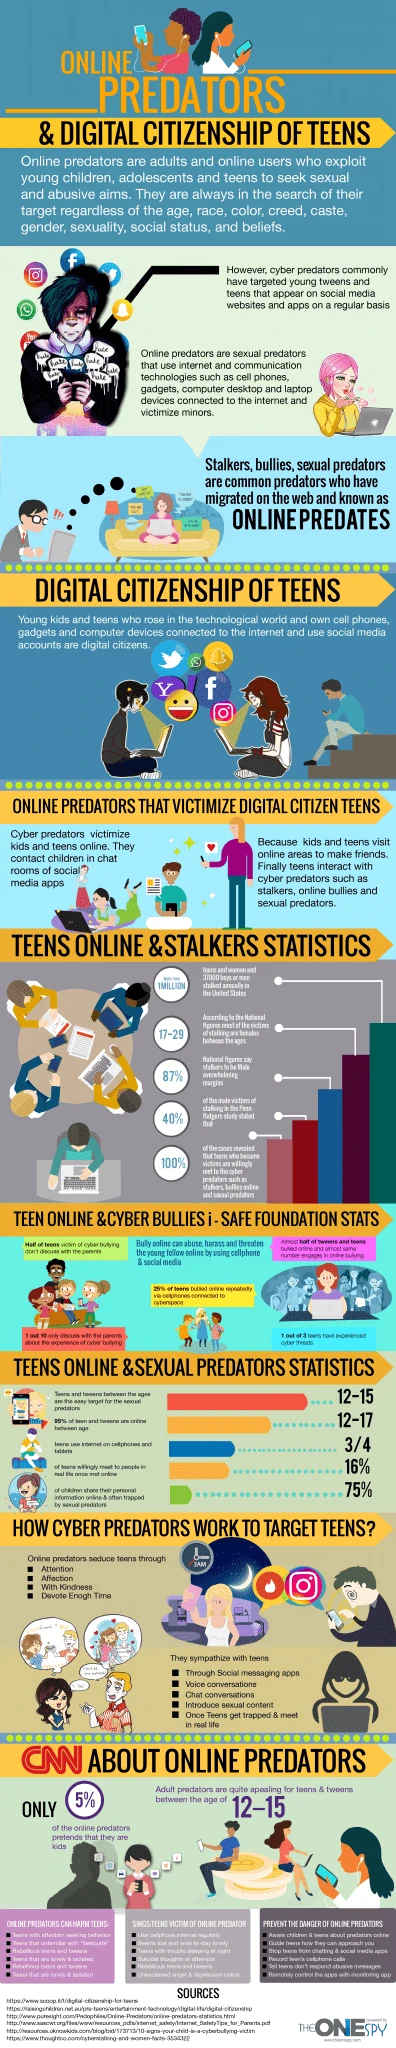 digital citizenship of teens and cyber predators infographic